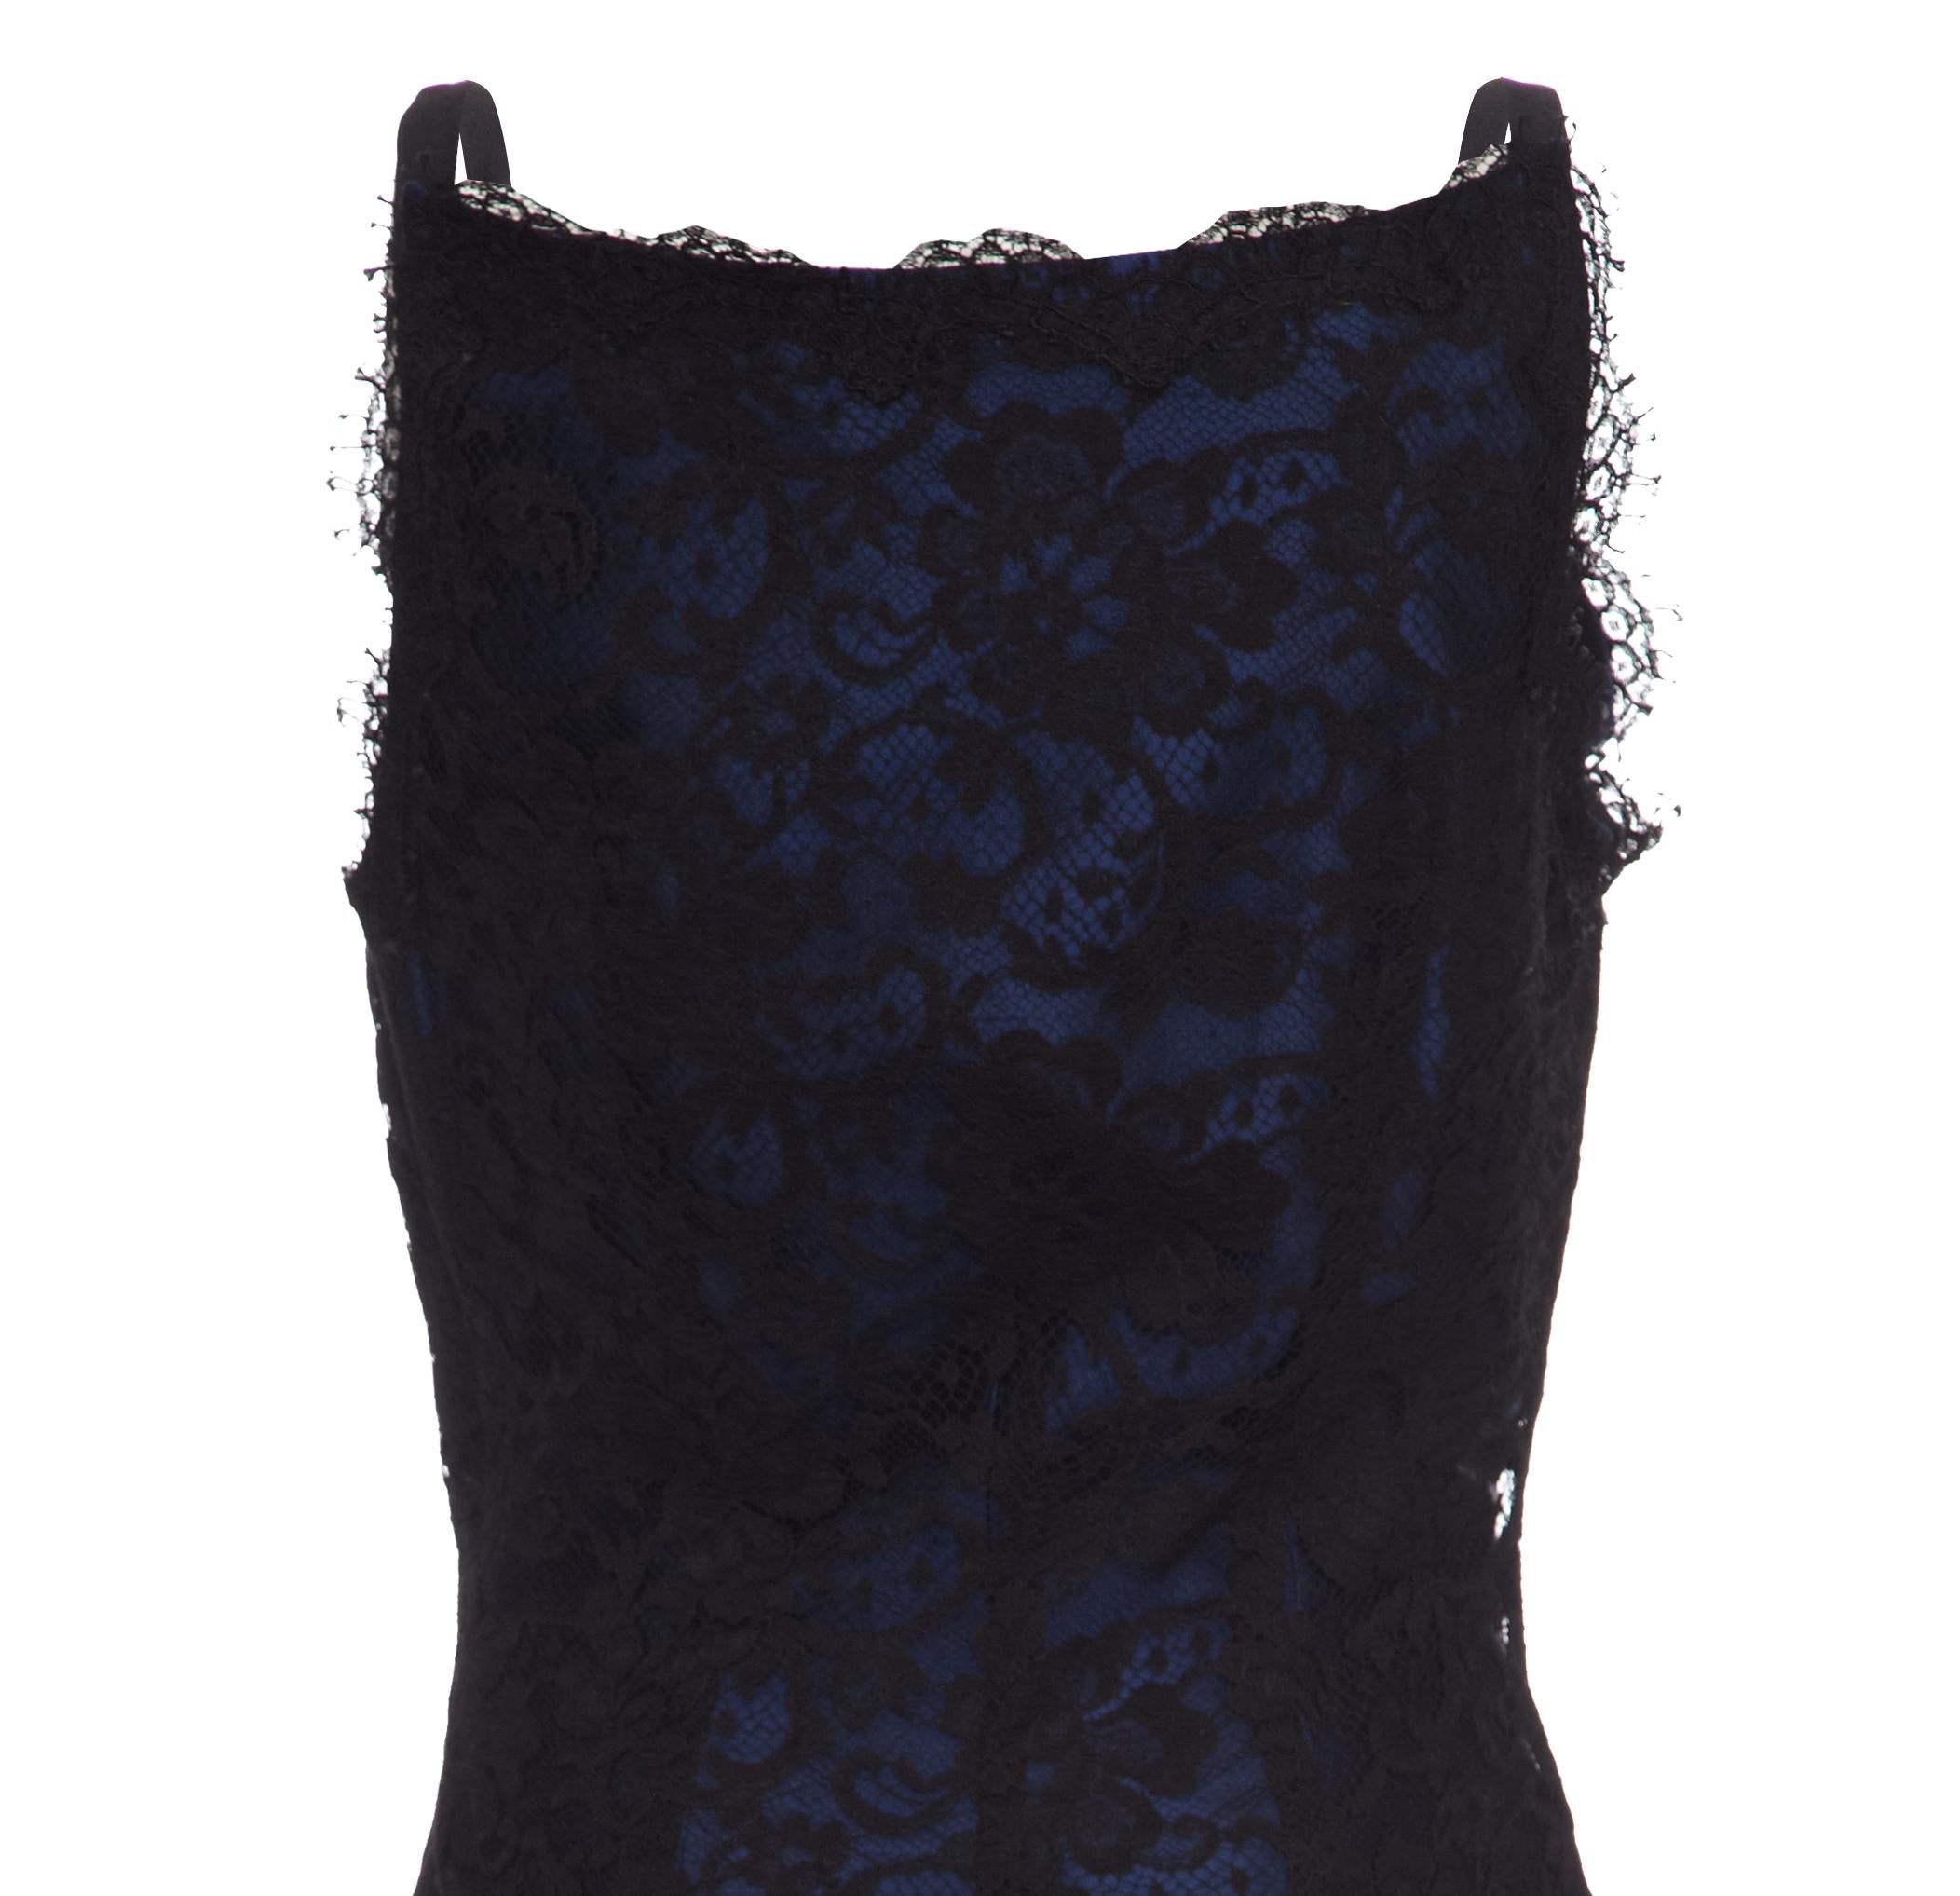 Women's 1990s David Fielden Couture Black Lace Dress with Blue Underlay